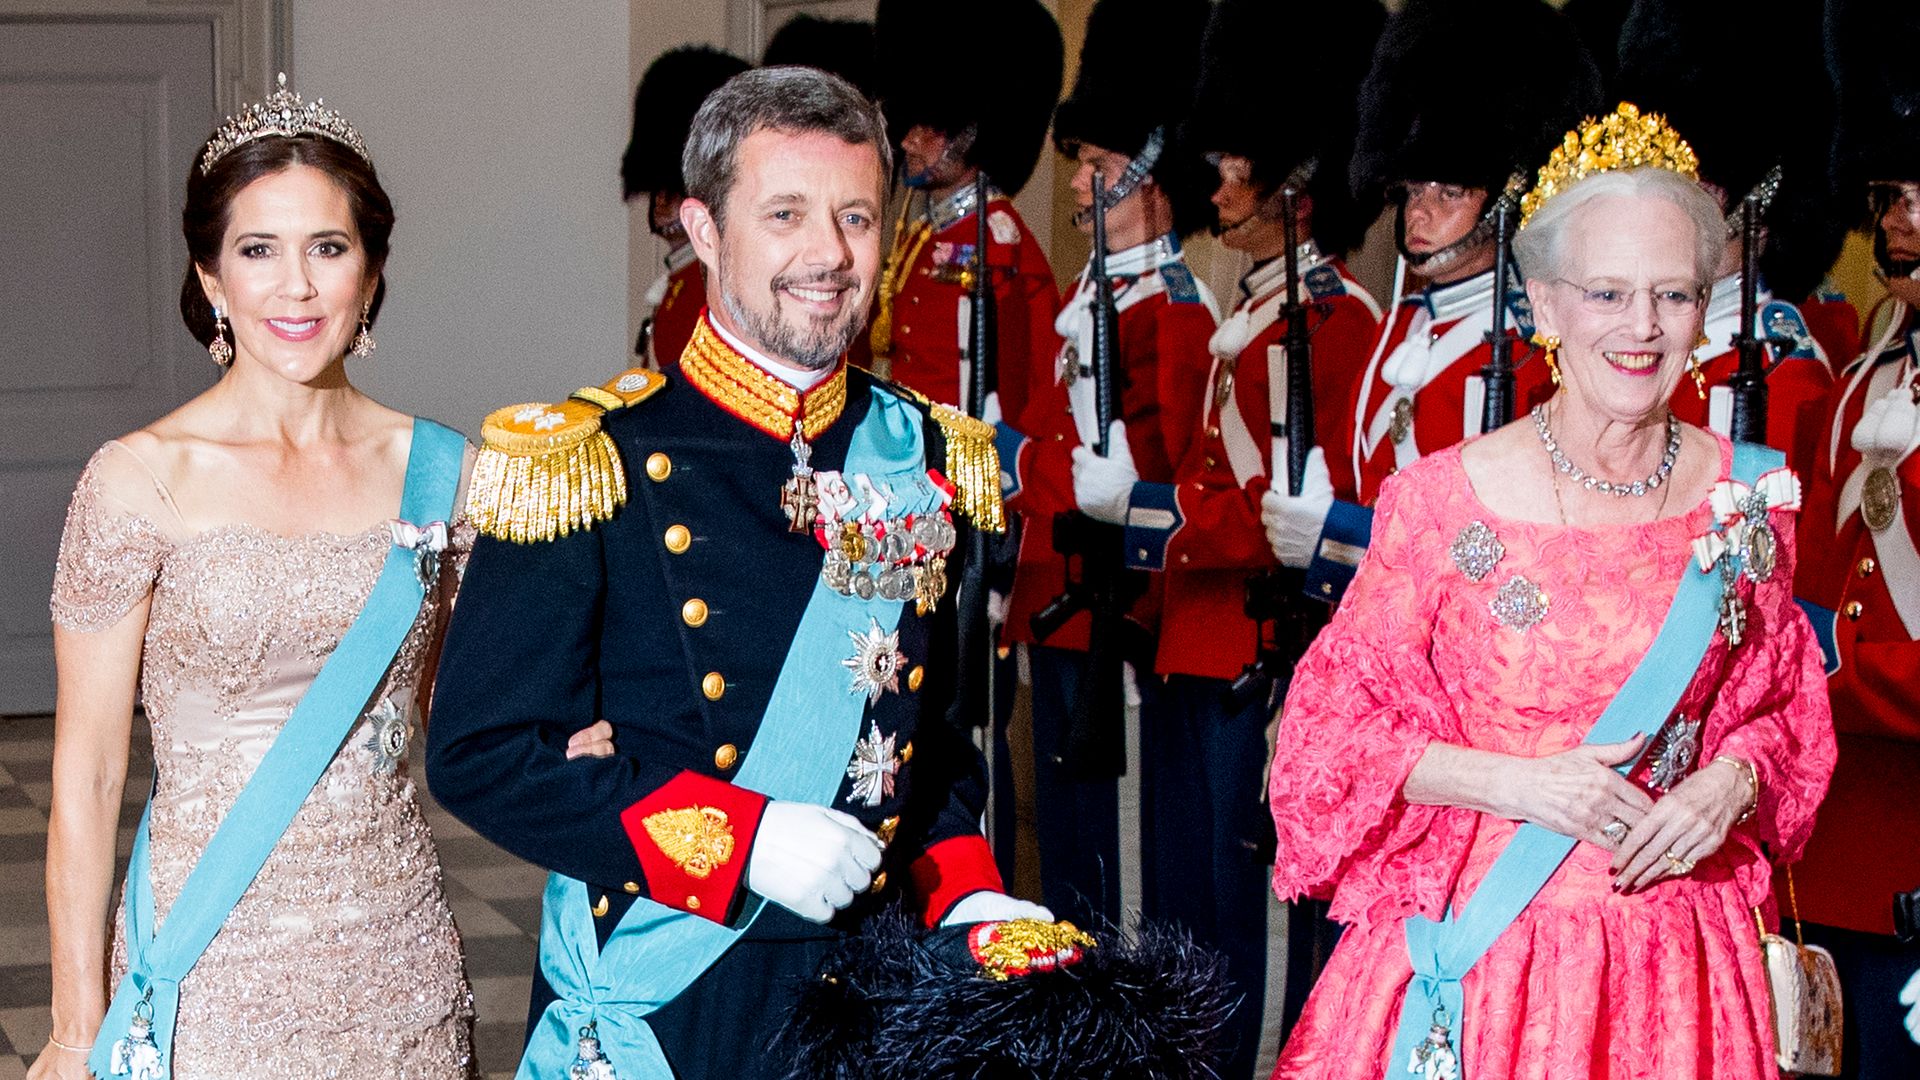 The guest of honor, Crown Prince Frederik, arrives with Crown Princess Mary and Queen Margrethe of Denmark.